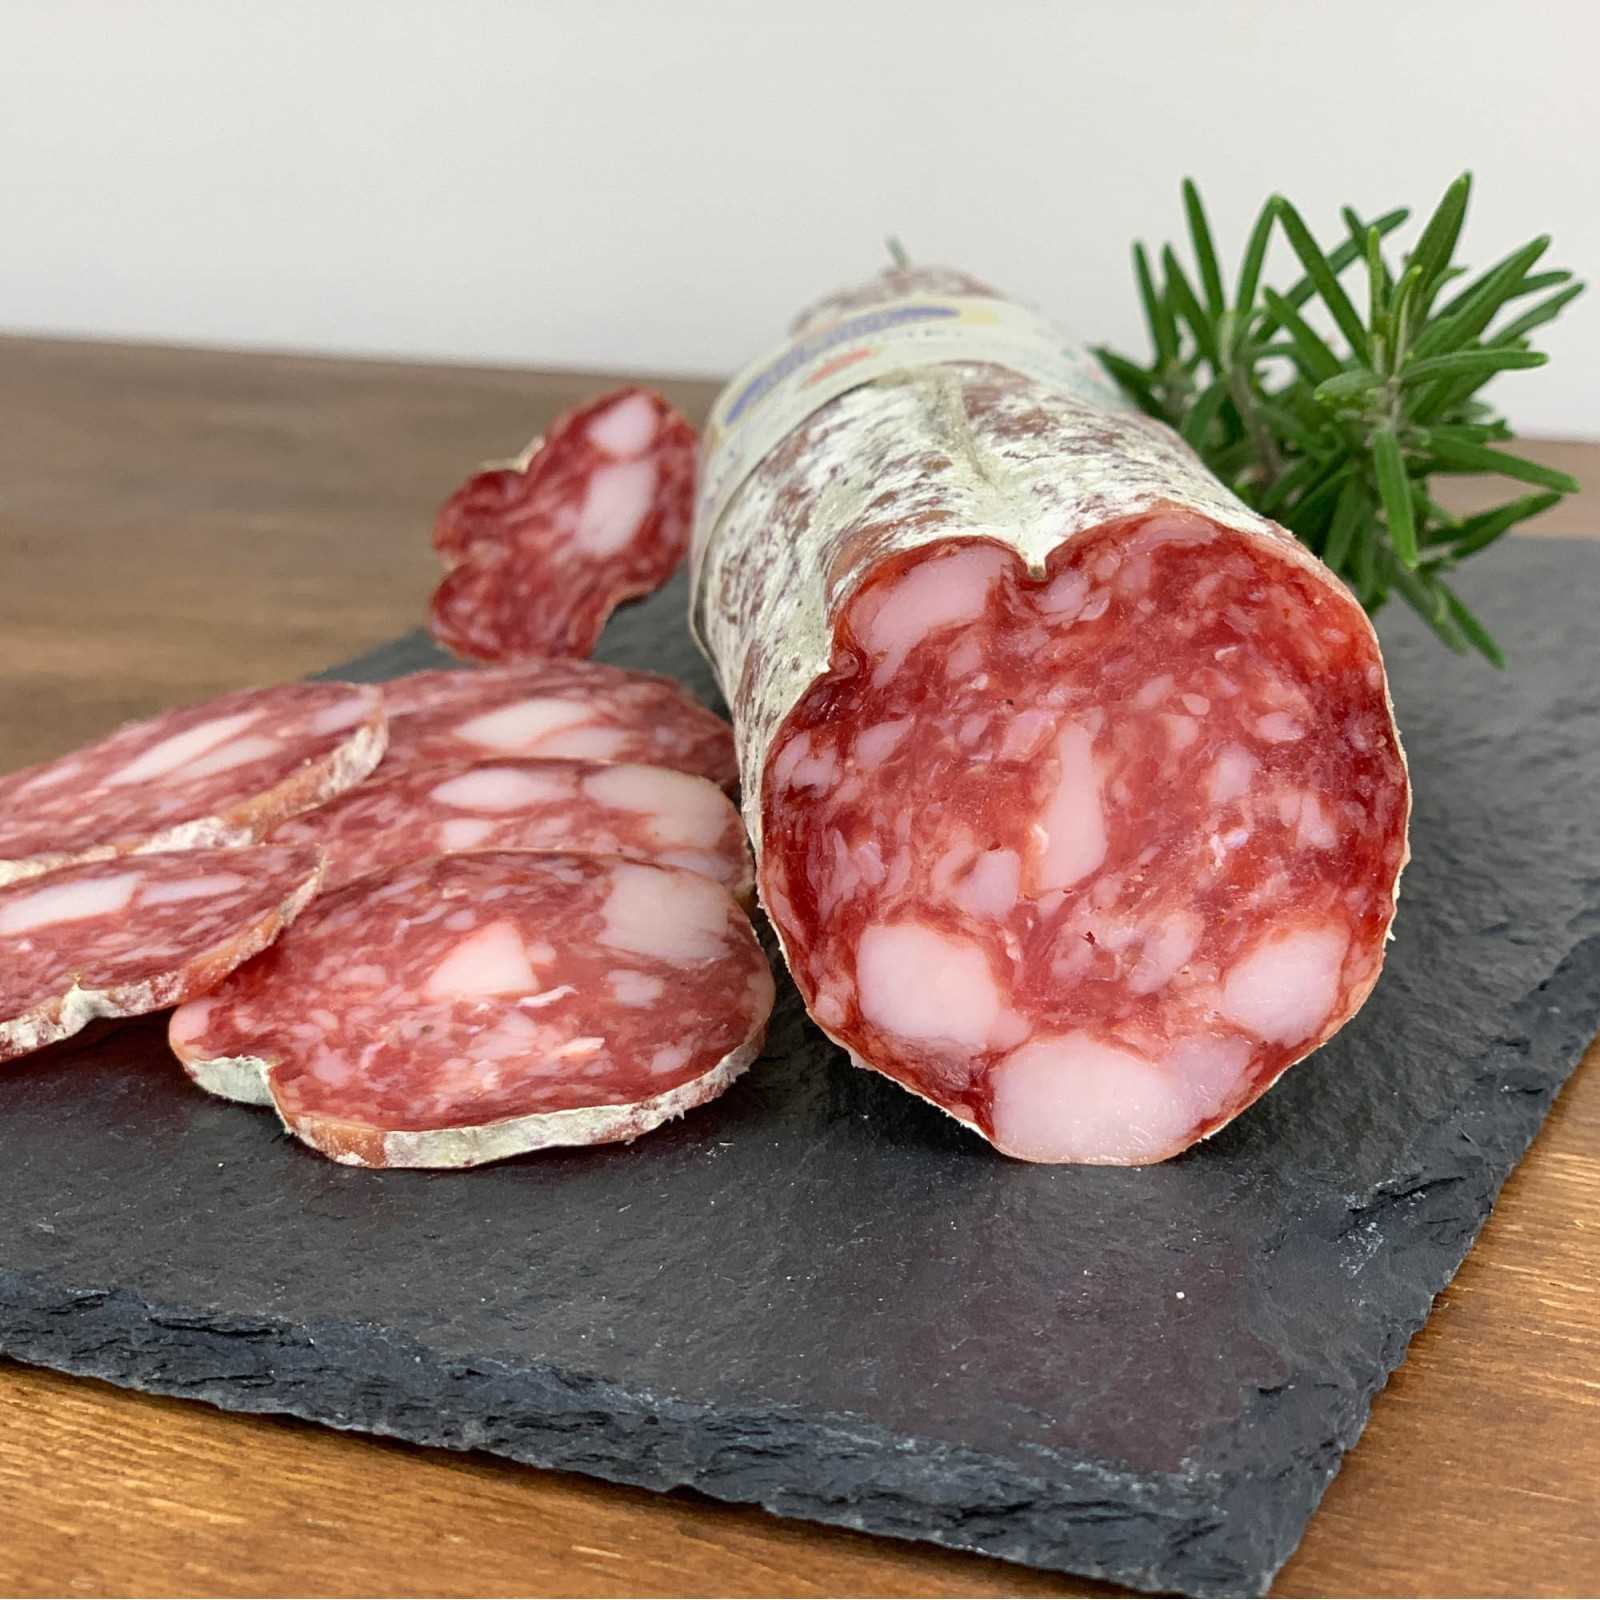 Tuscan Salami is an artisanal sausage typical of the Tuscan gastronomic tradition, made according to an ancient recipe handed down for centuries. It is characterized by a soft and compact consistency, bright red color and a particularly intense taste, enriched with spices and aromas. This version of Tuscan Salami has a net weight of about 500 g and is packaged whole in natural casing.